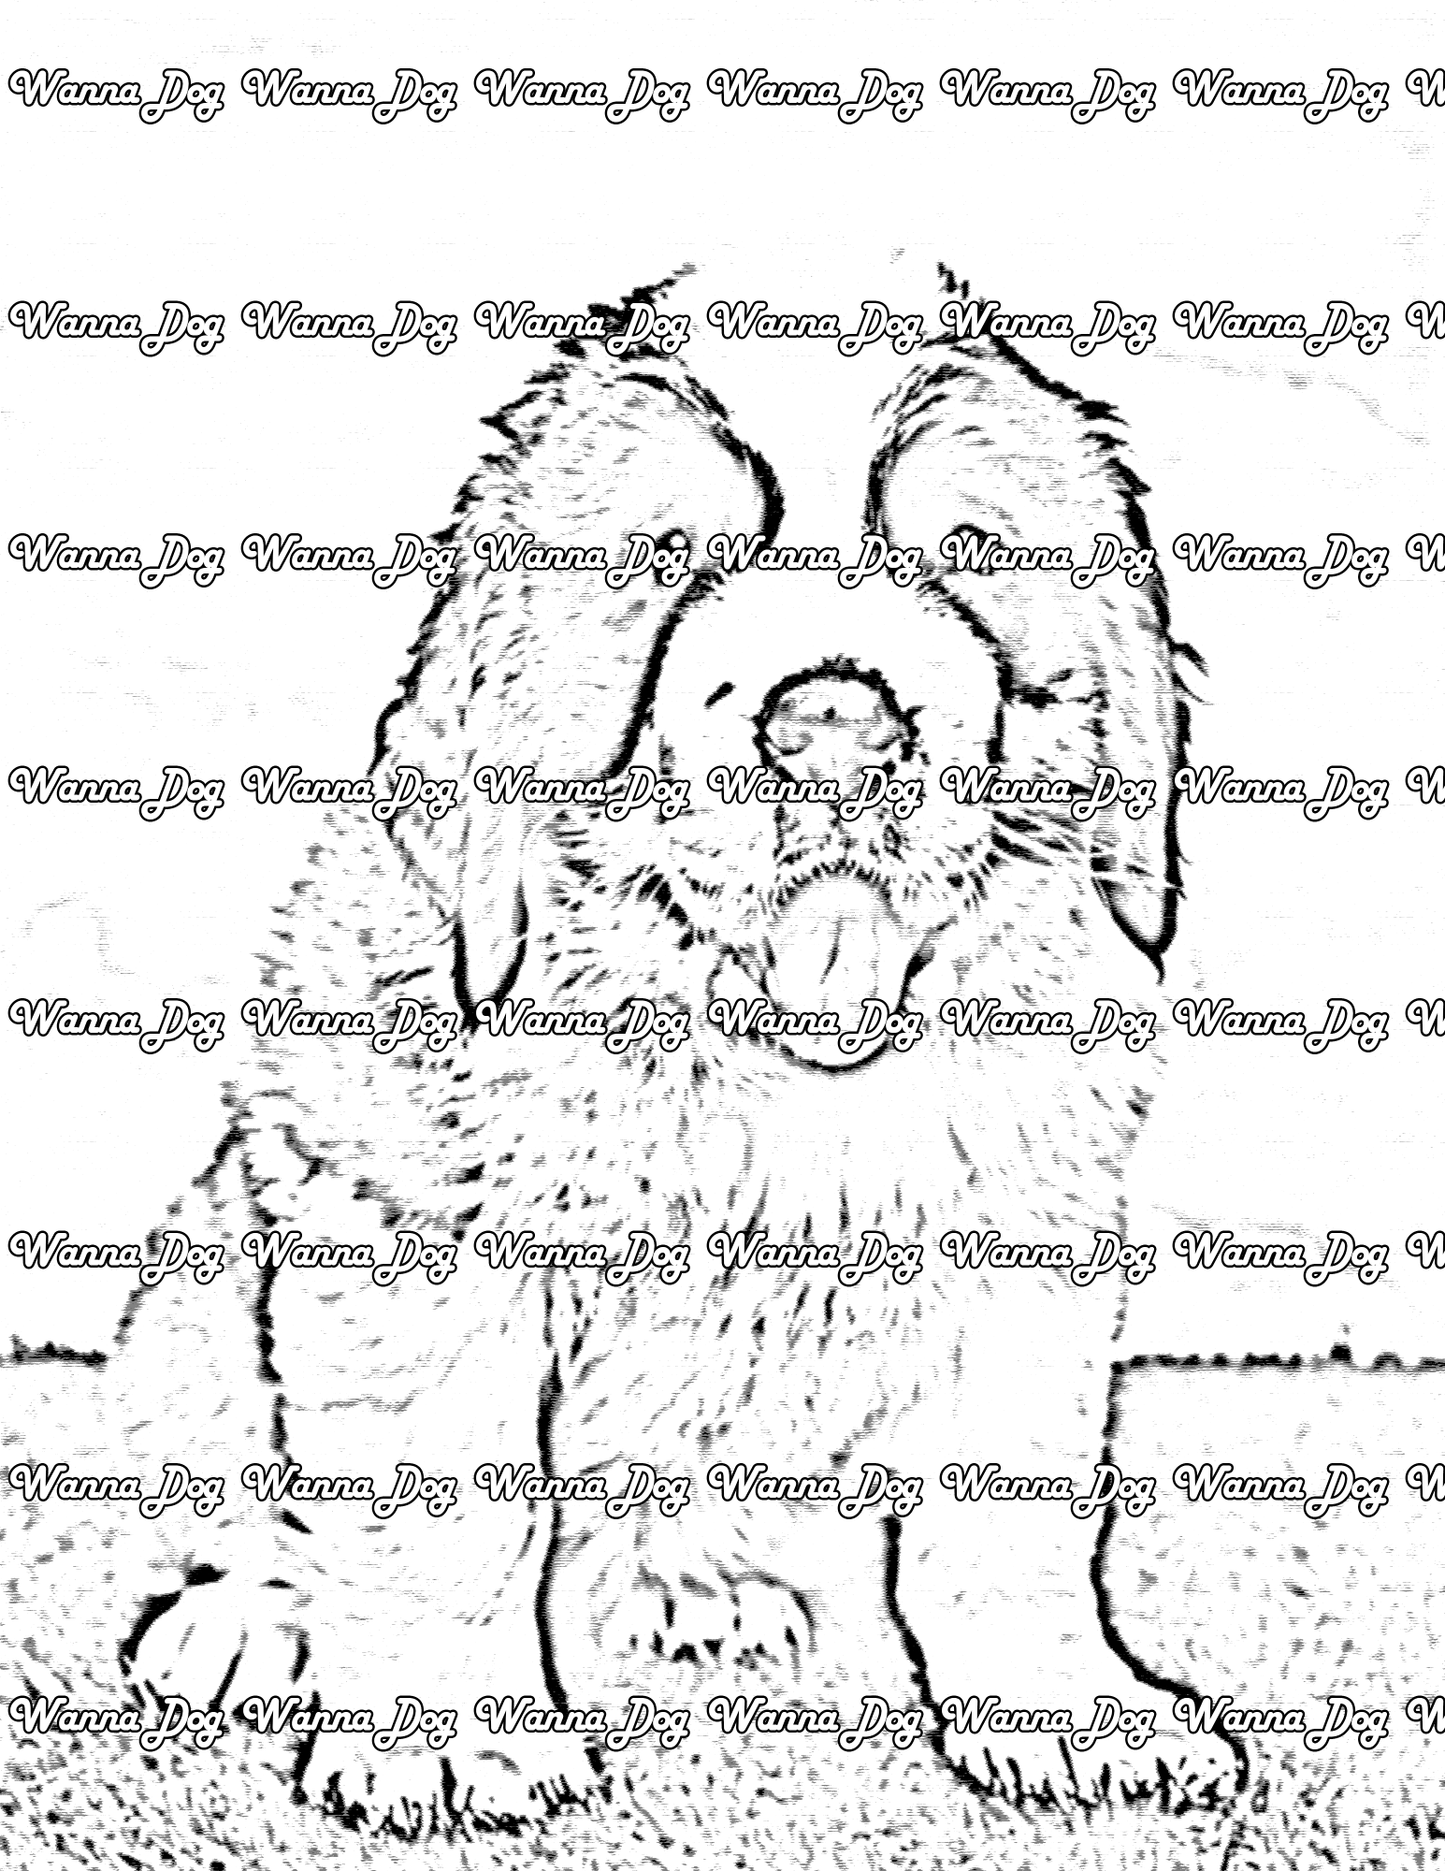 Saint Bernard Coloring Page of a Saint Bernard sitting and posing with their tongue out